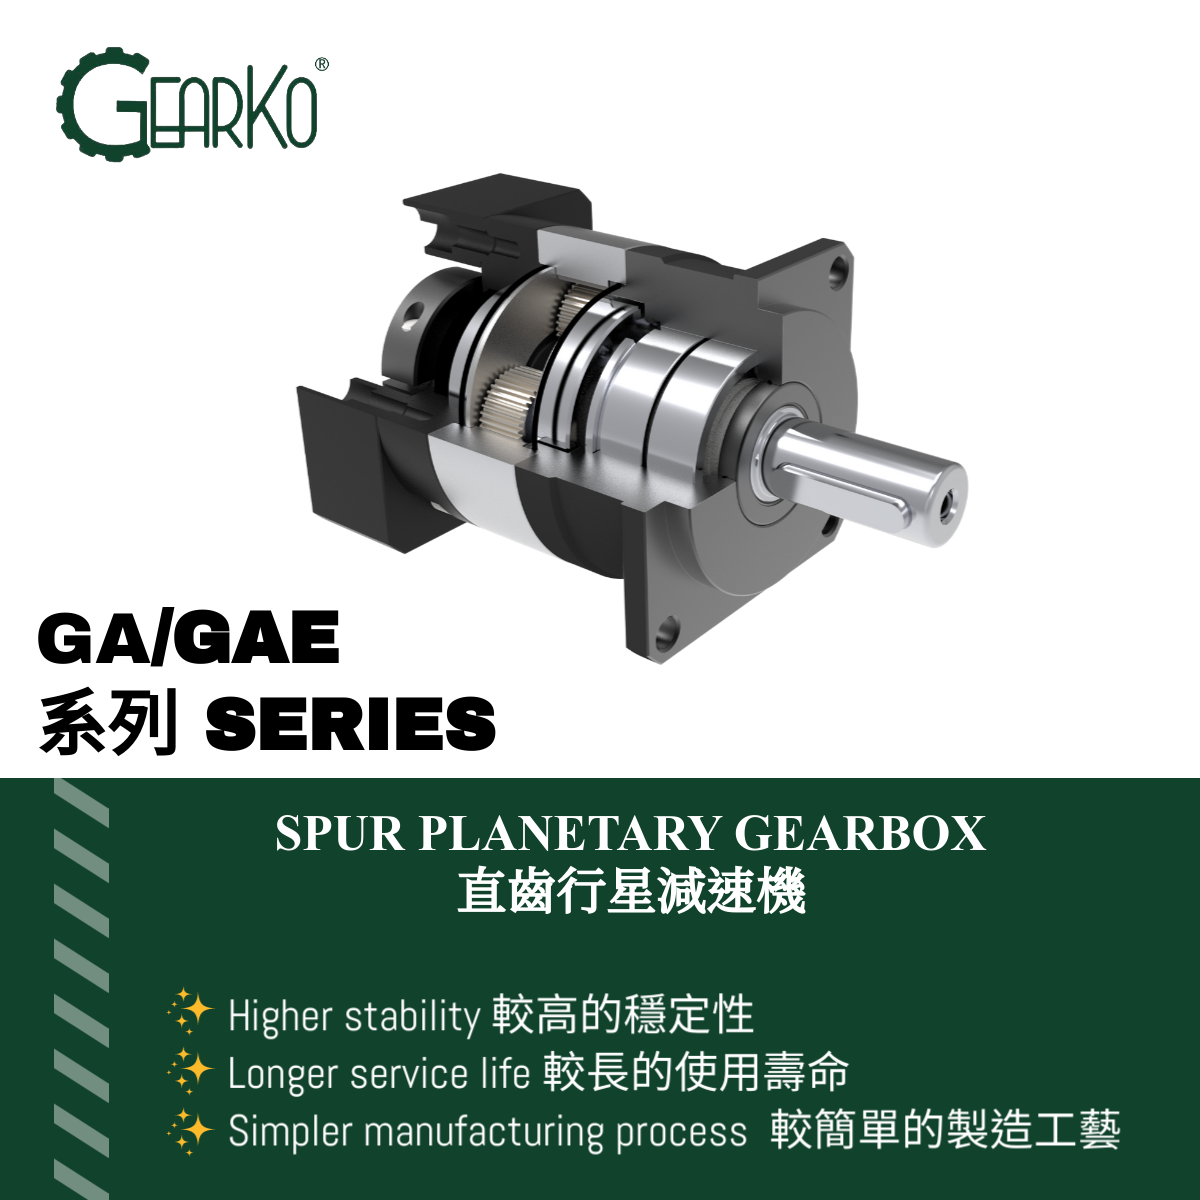 Introduction to GearKo's GA/GAE Series Spur Gear Reducers